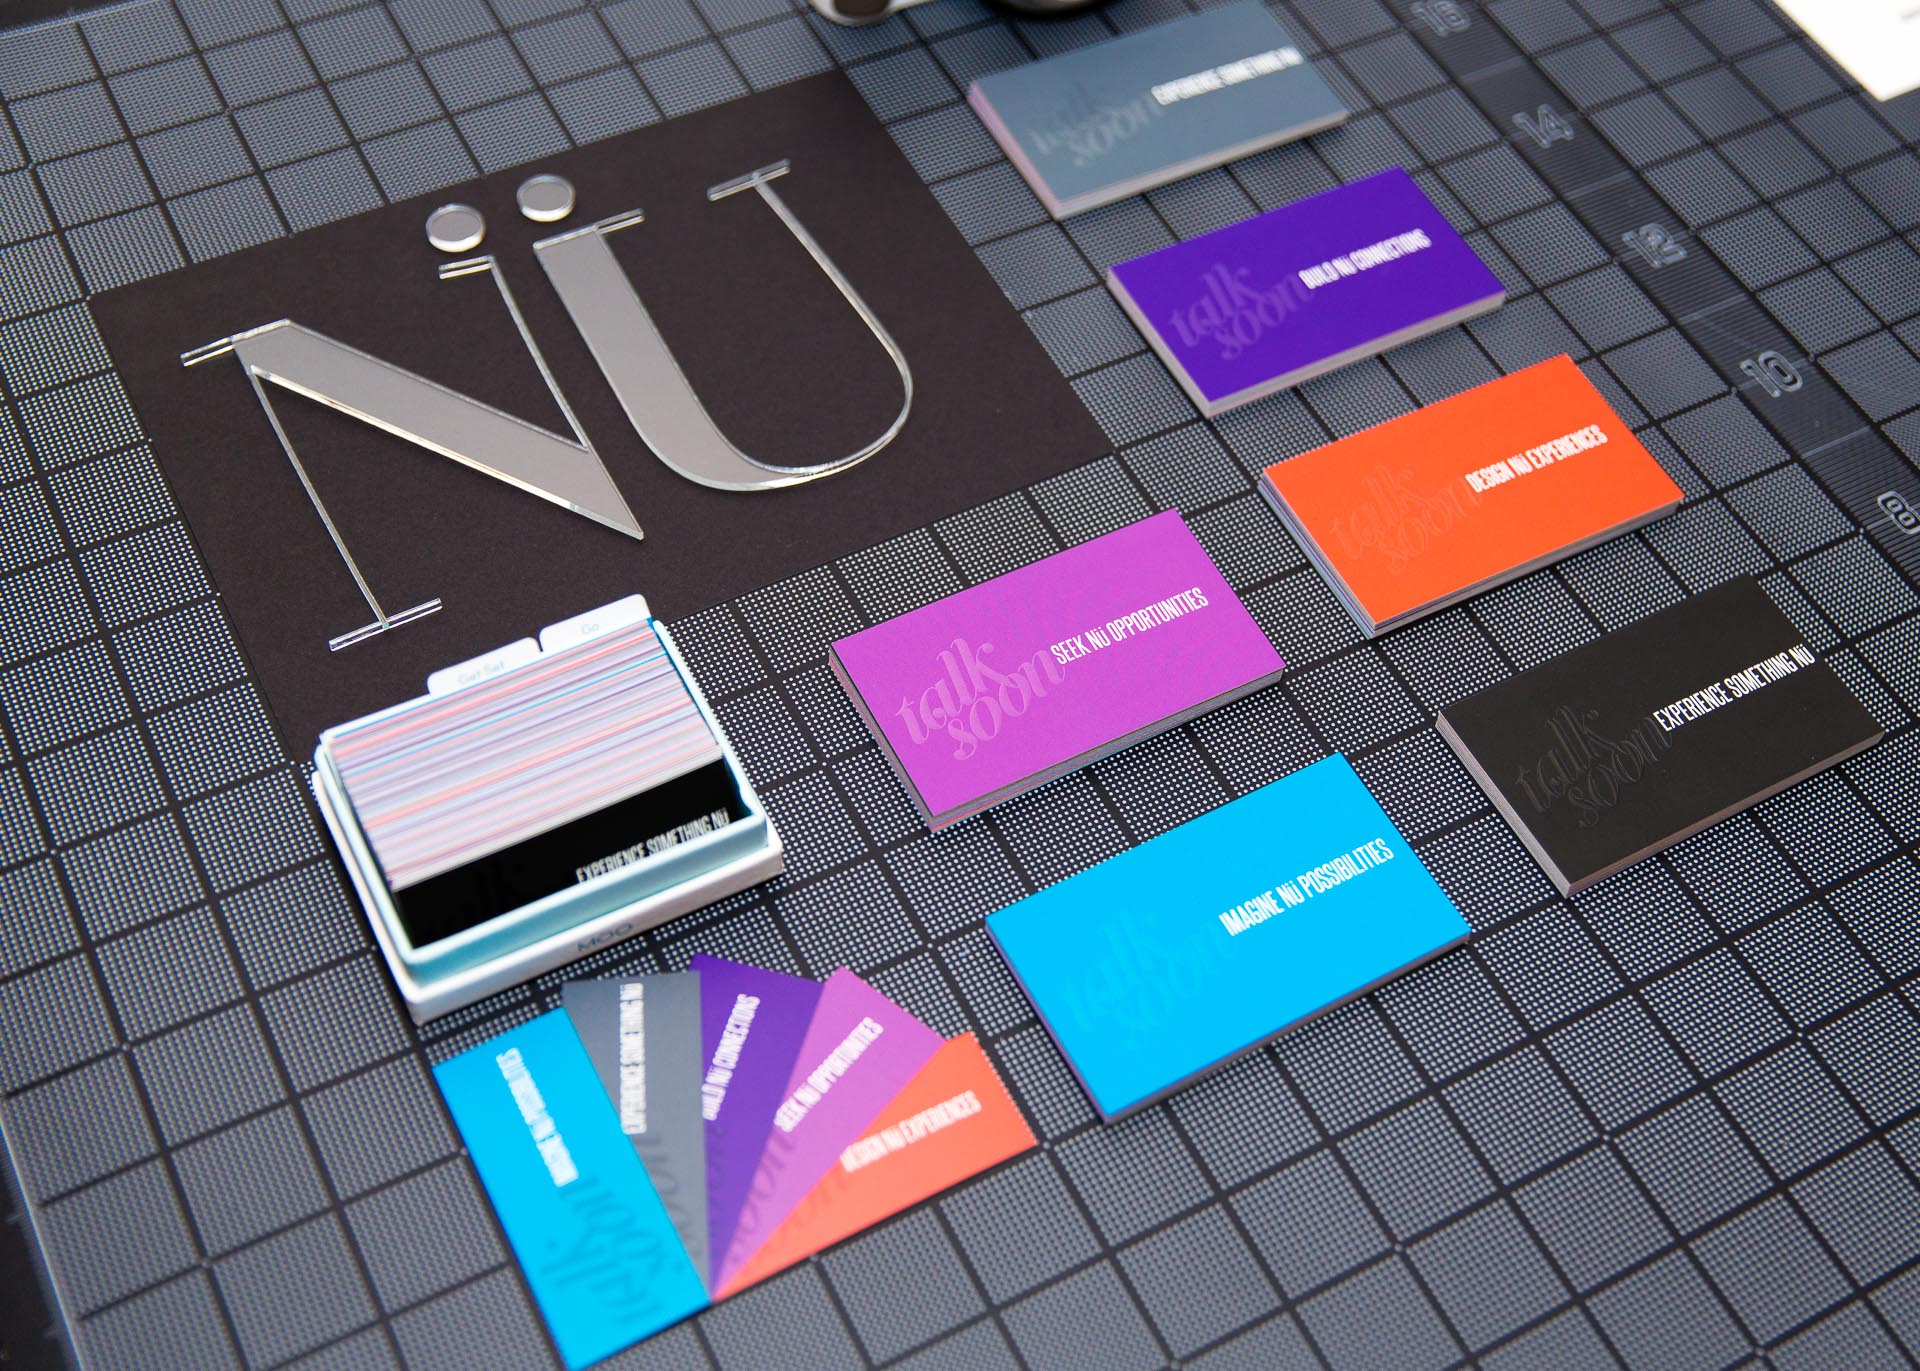 NÜ in acrylic letters, a white camera, and purple, blue, and red business cards on a black gridded surface